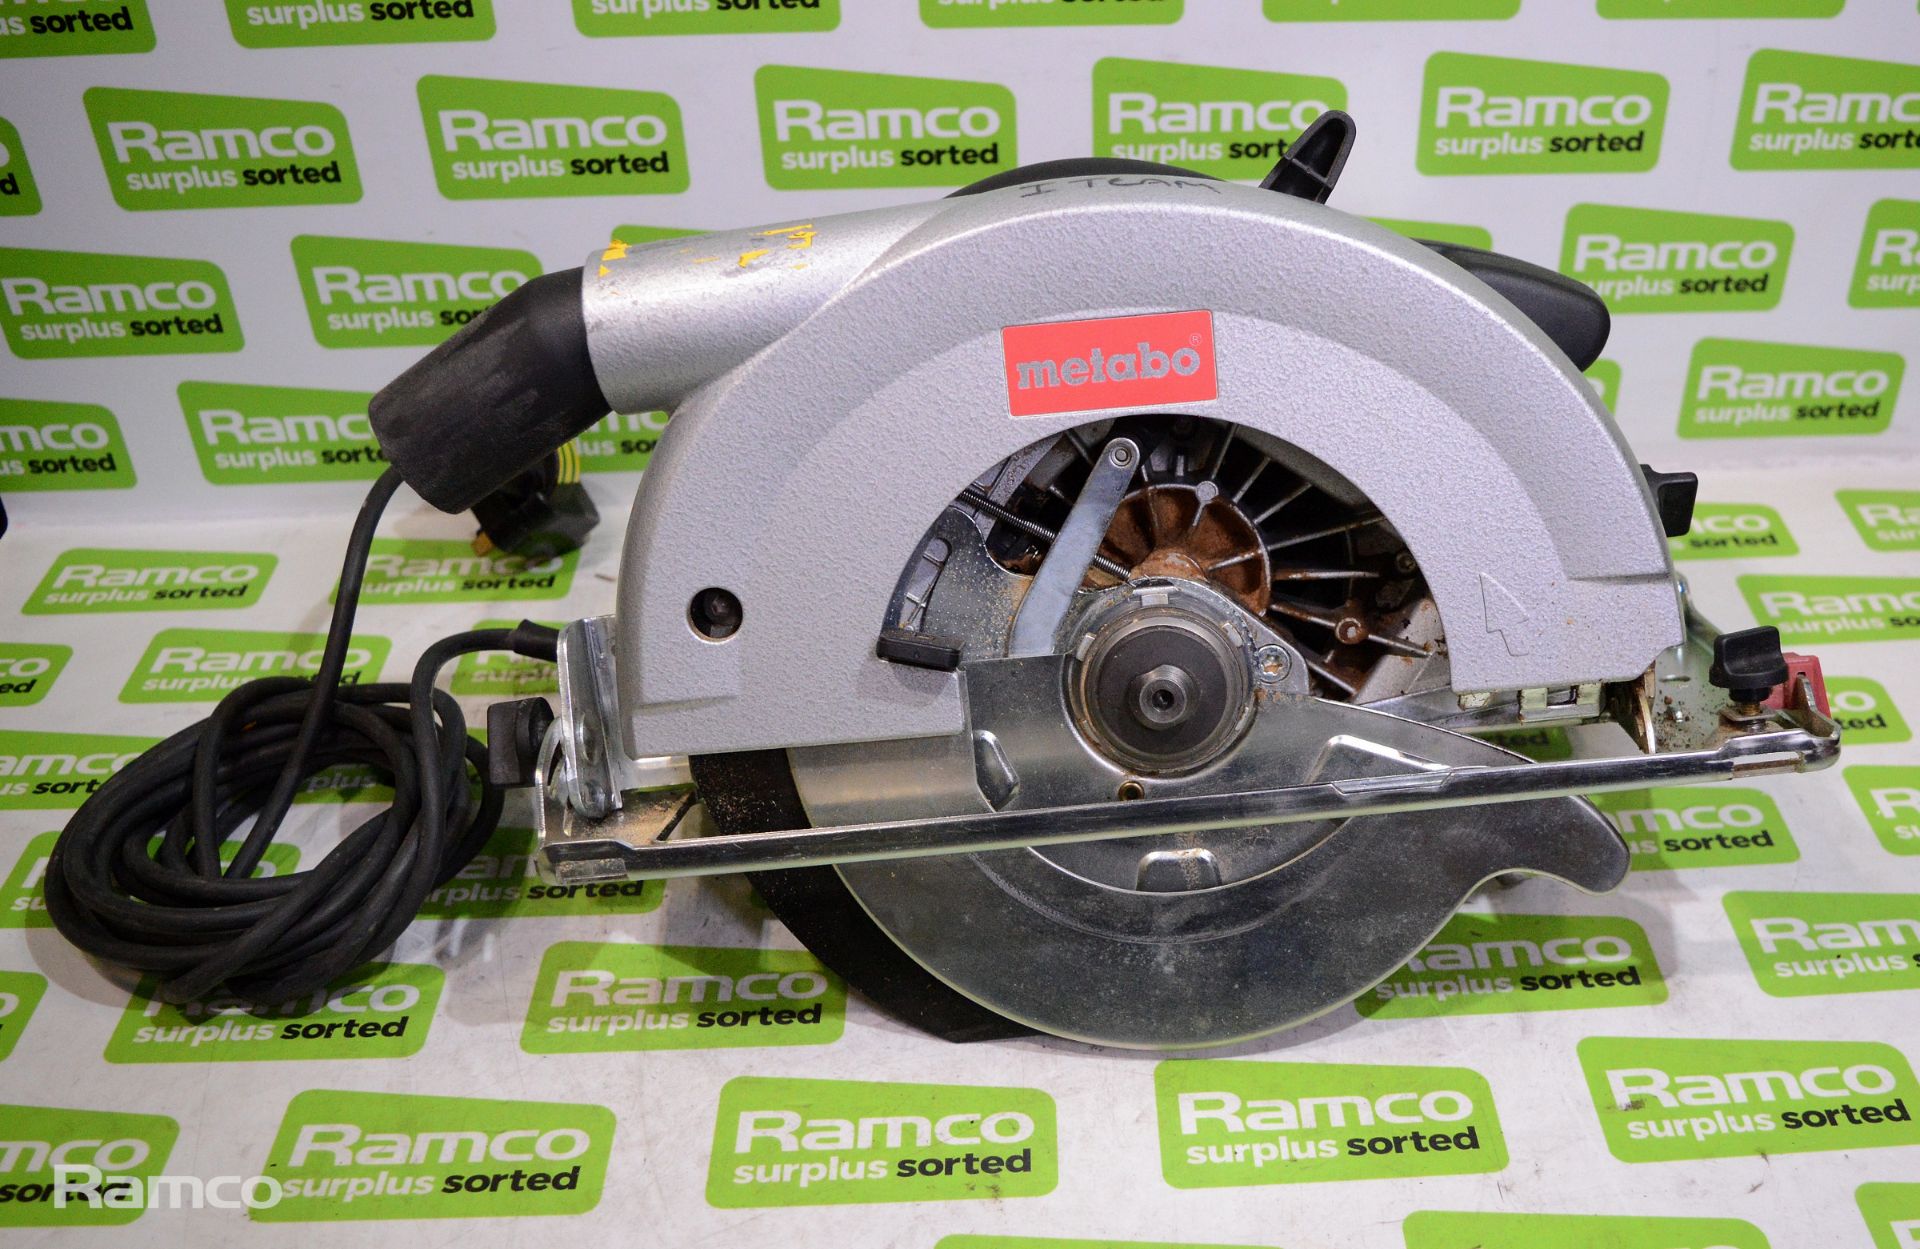 Metabo KSE 68 plus electric circular saw with case - 240v - Image 3 of 5